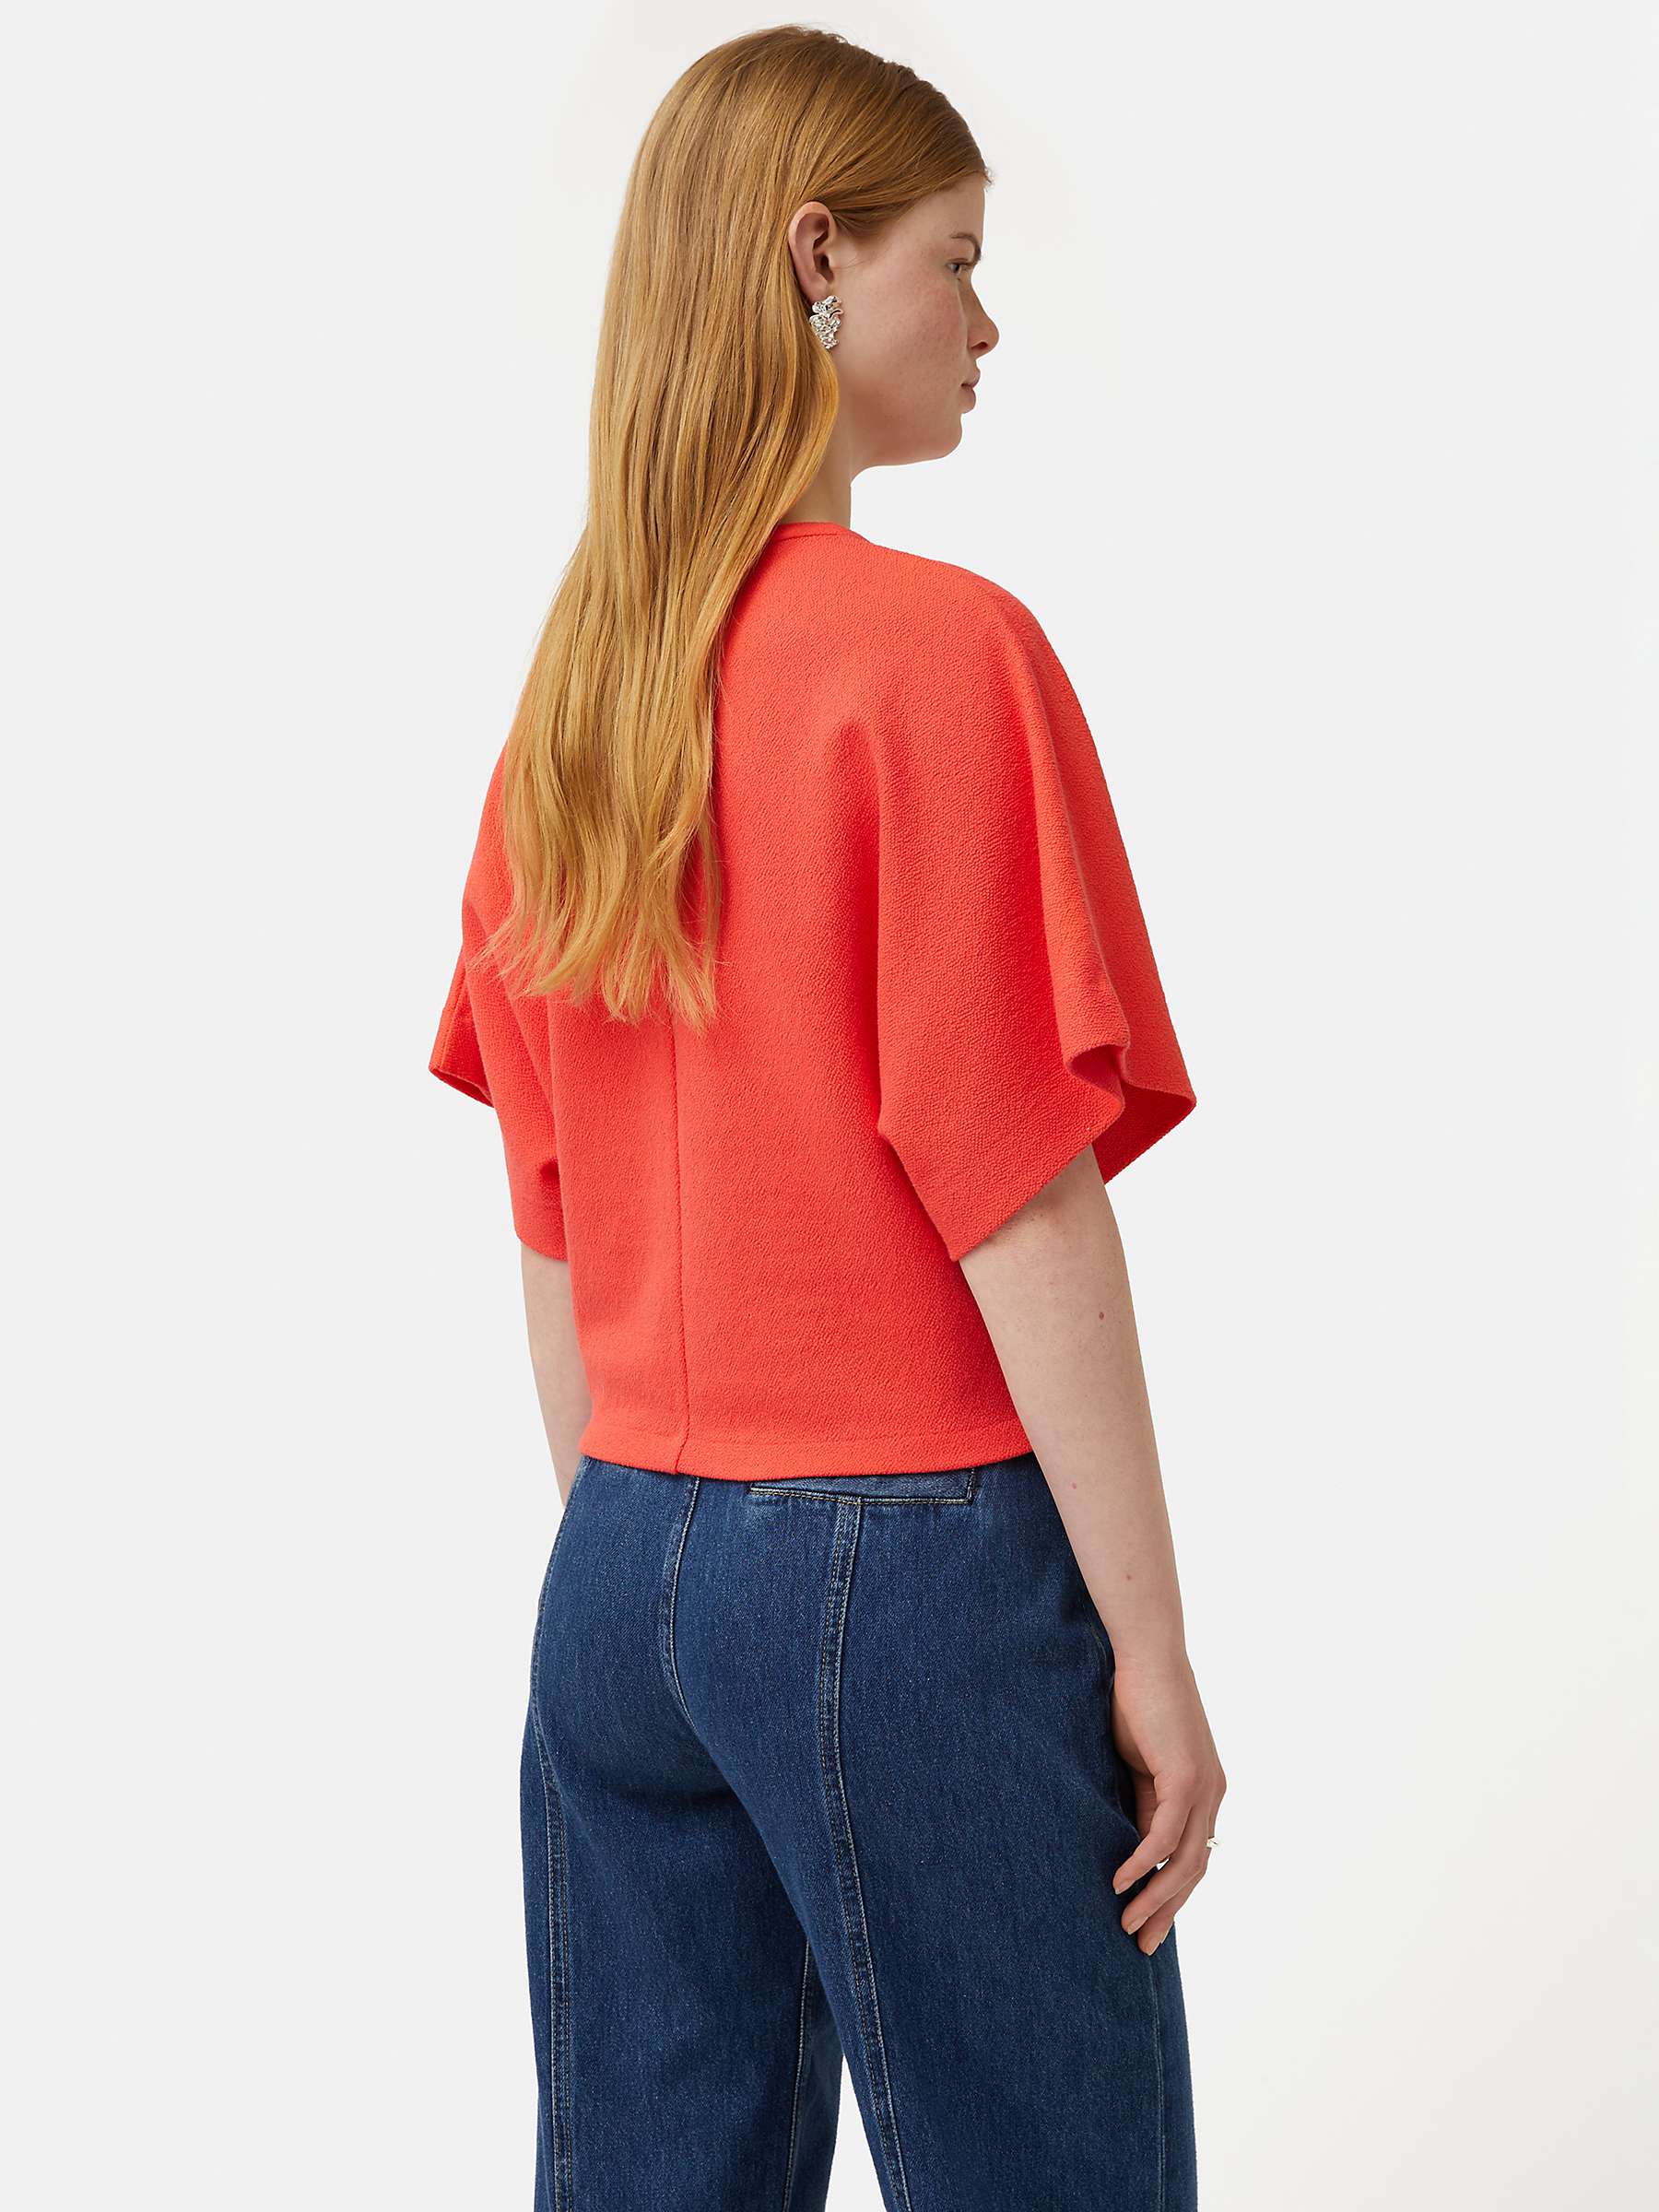 Buy Jigsaw Textured Jersey Top, Coral Online at johnlewis.com